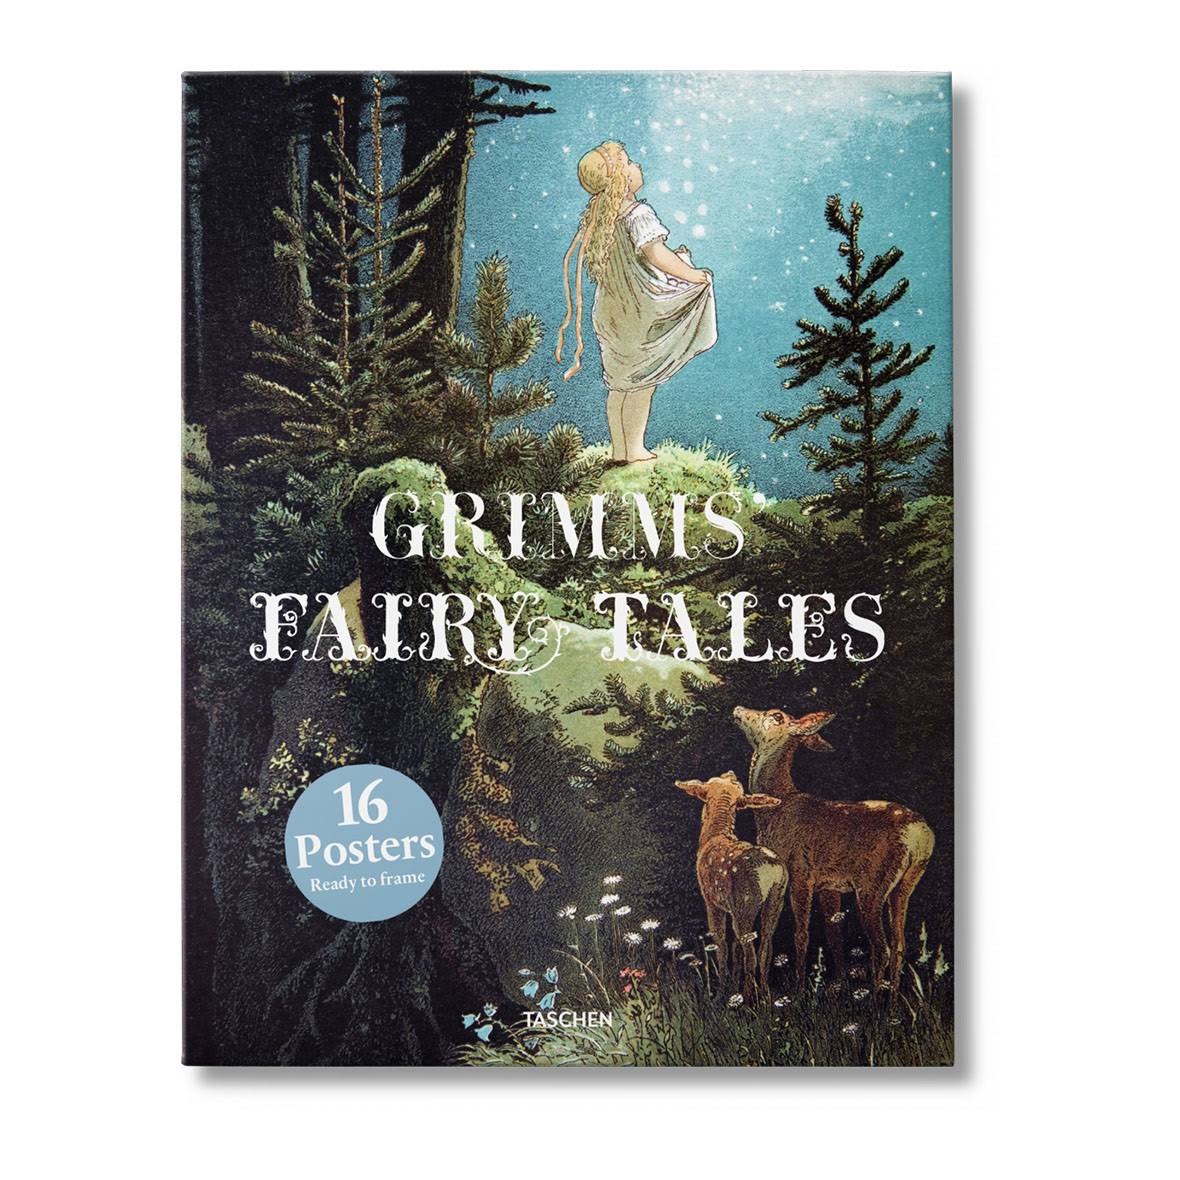 Grimms' Fairy Tales Poster Set - Taschen Publishing